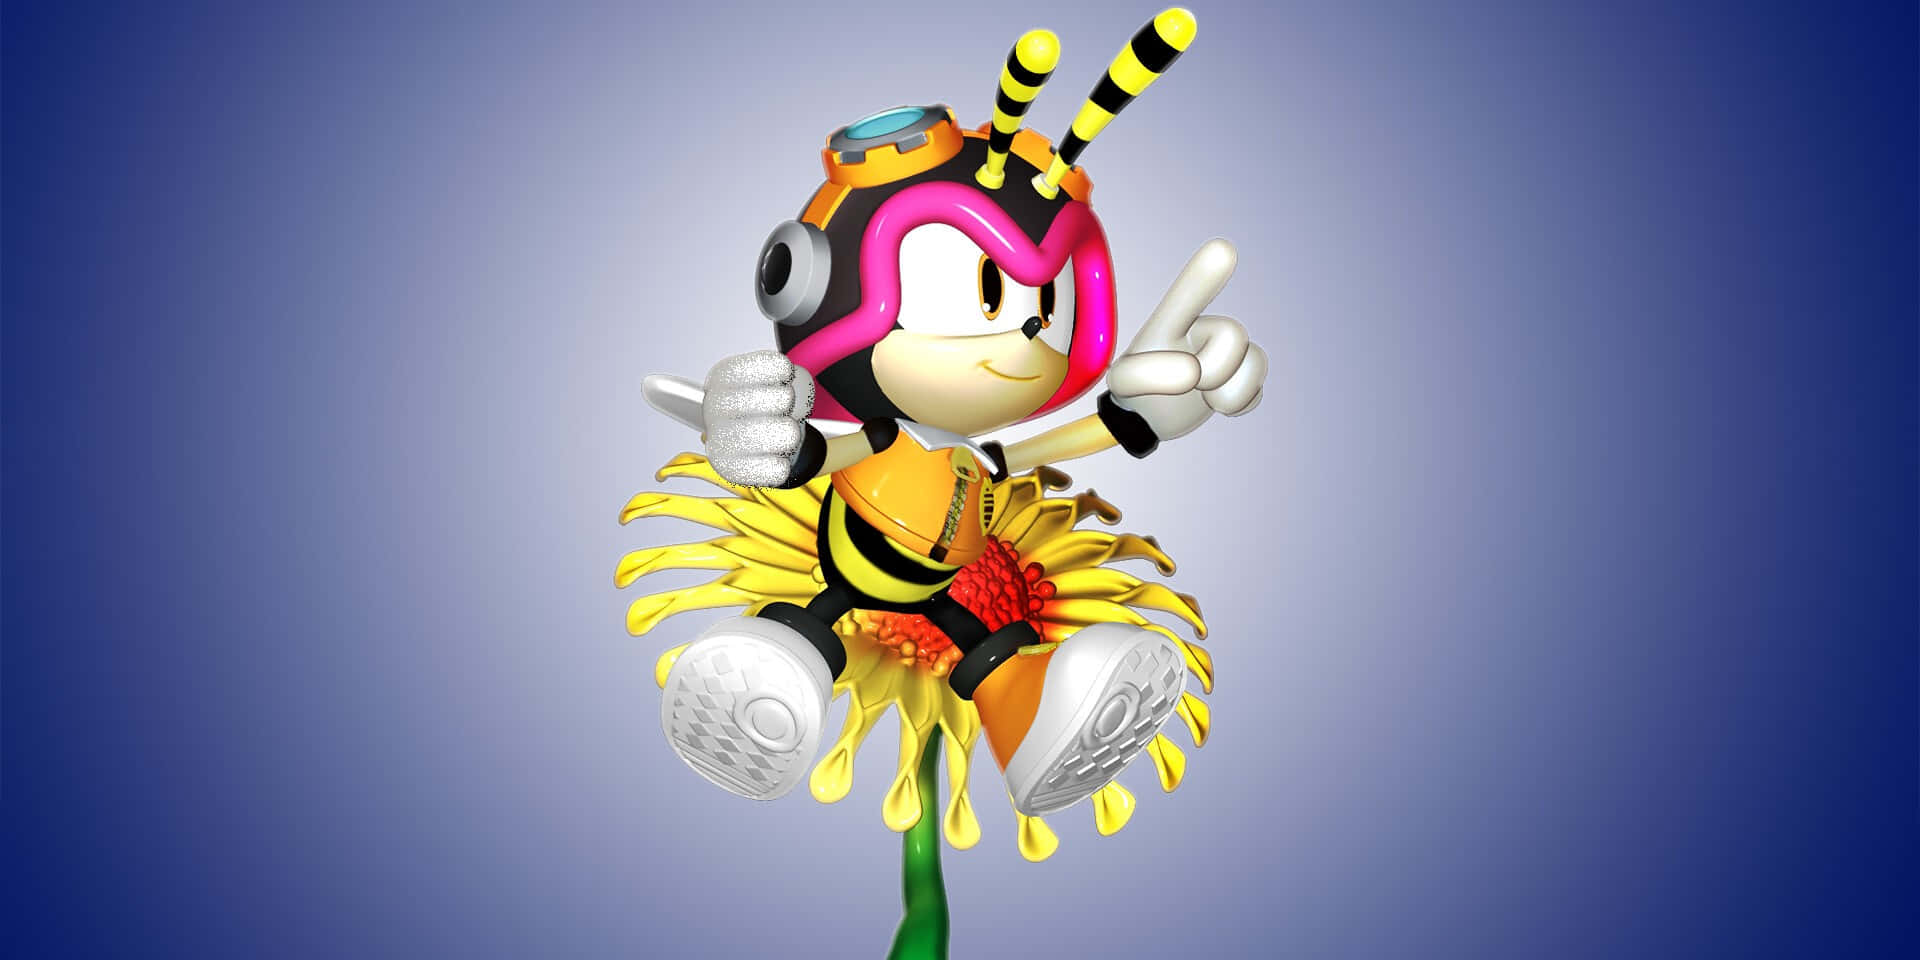 Cheerful Charmy Bee Flying in the Sky Wallpaper